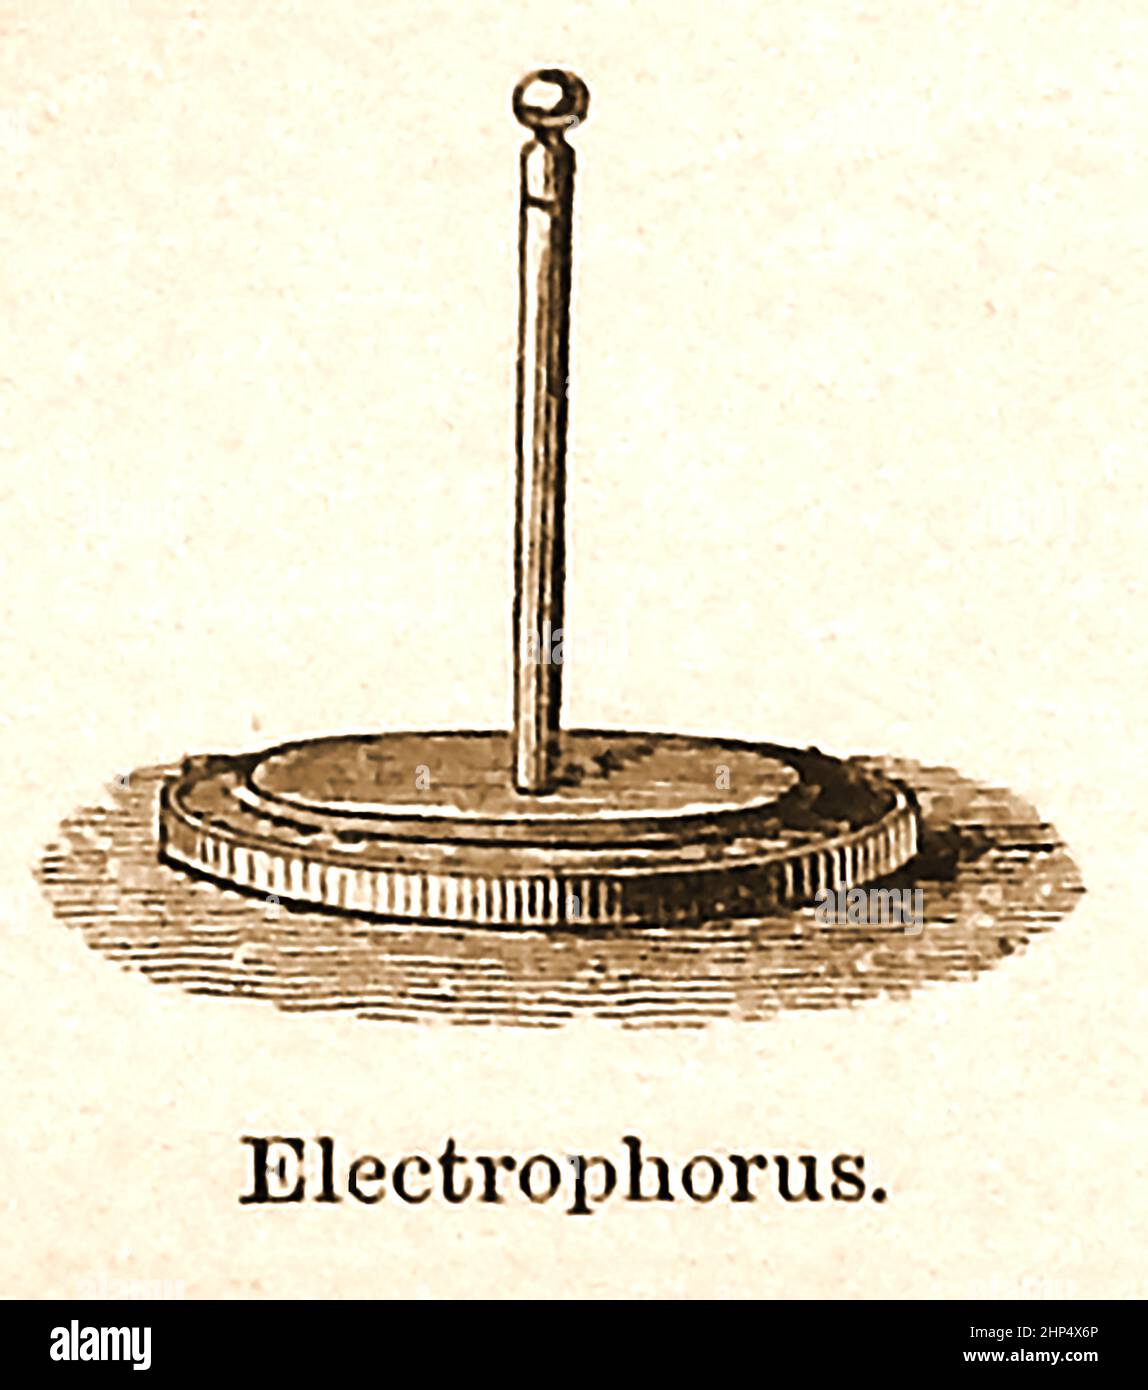 EARLY ELECTRICITY EXPERIMENTS   - A late 19th Century engraving of an  Electrophorus, a simple manual capacitive electrostatic generator used to produce electrostatic charges . Stock Photo